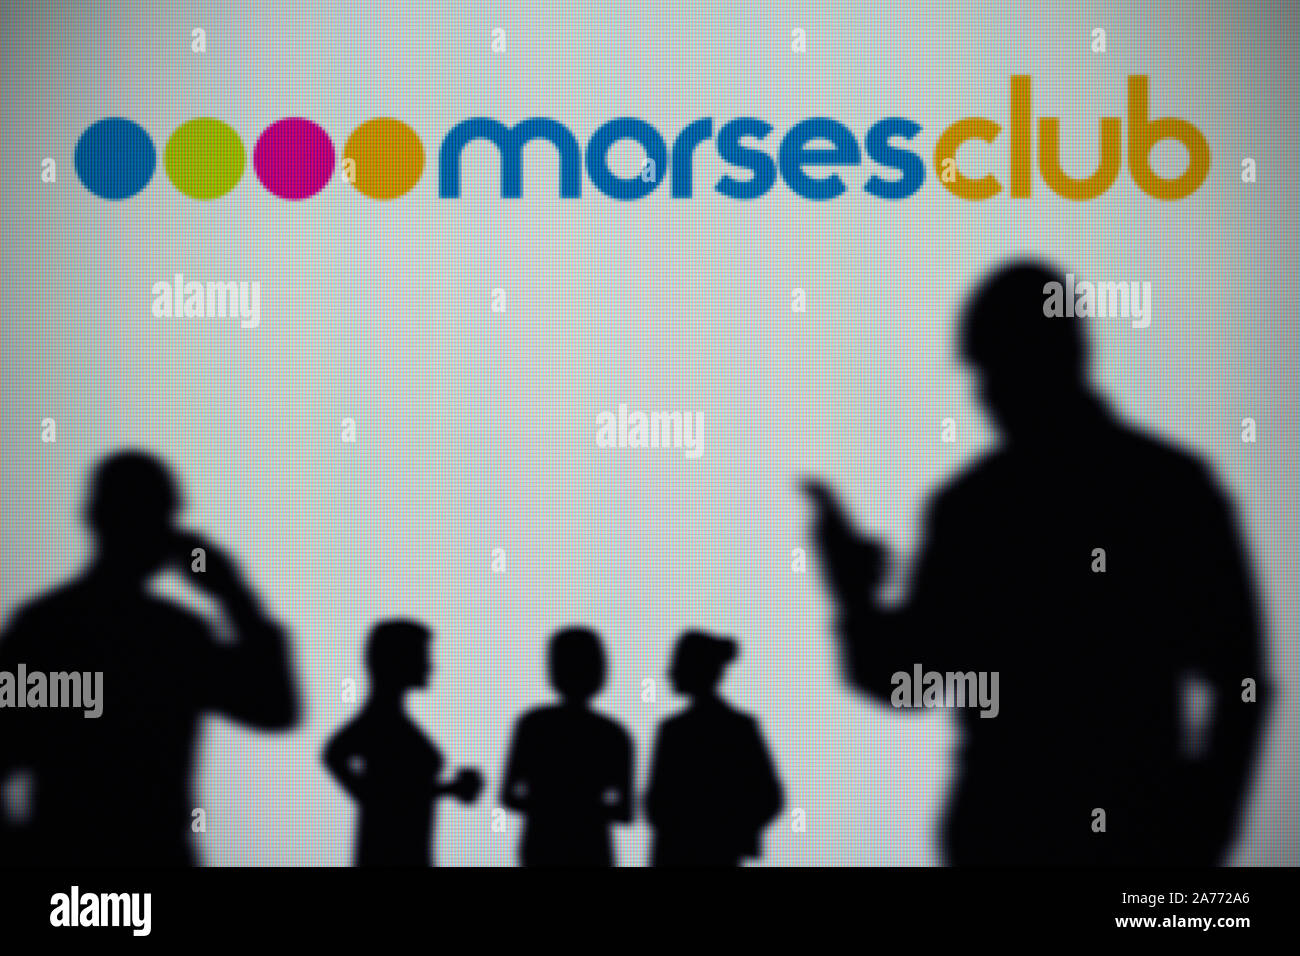 The Morses Club logo is seen on an LED screen in the background while a silhouetted person uses a smartphone (Editorial use only) Stock Photo